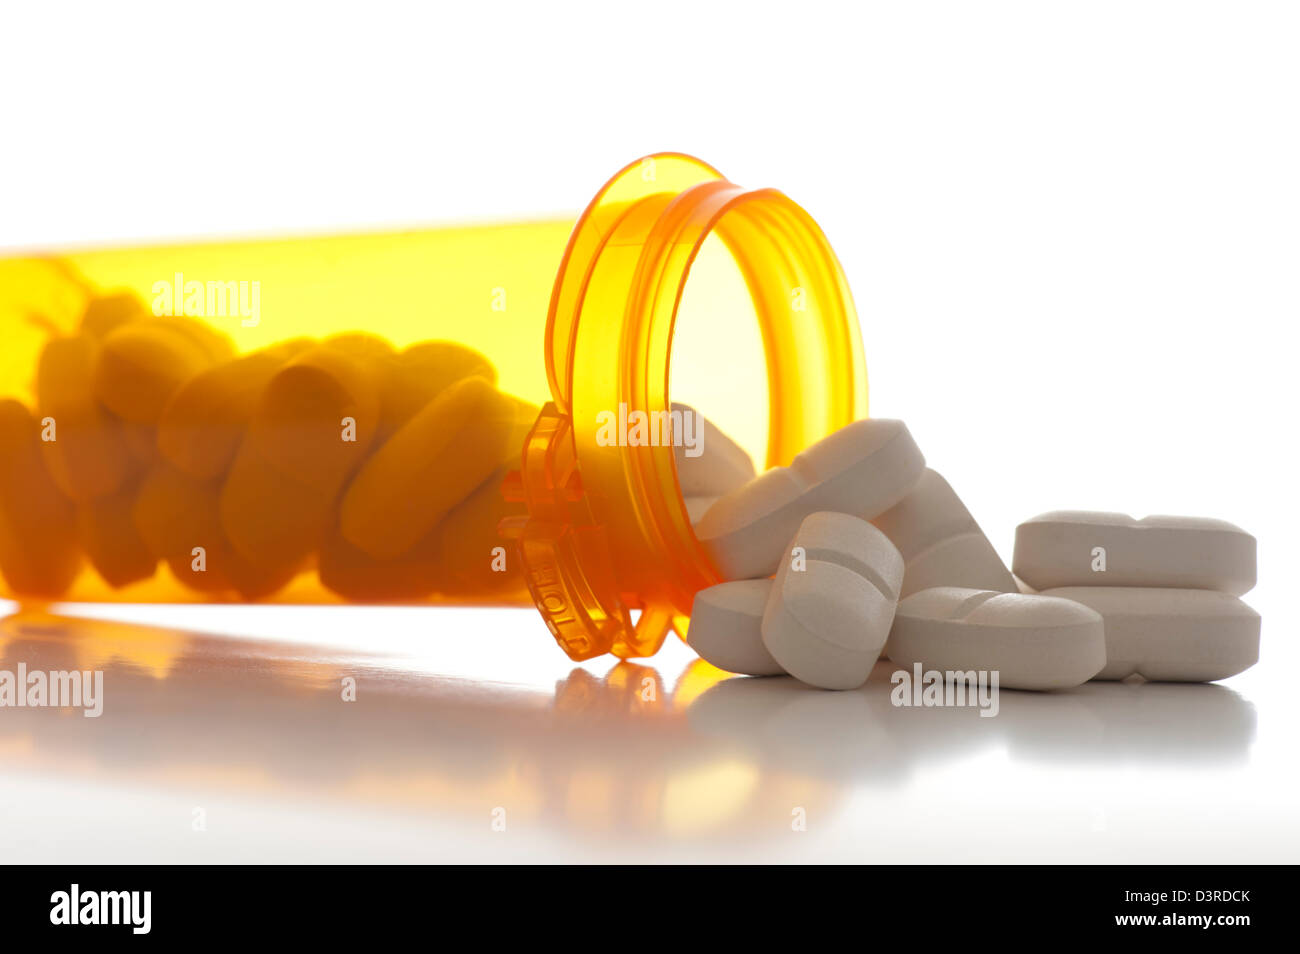 closeup view of prescription pill bottle with pills and no label Stock Photo